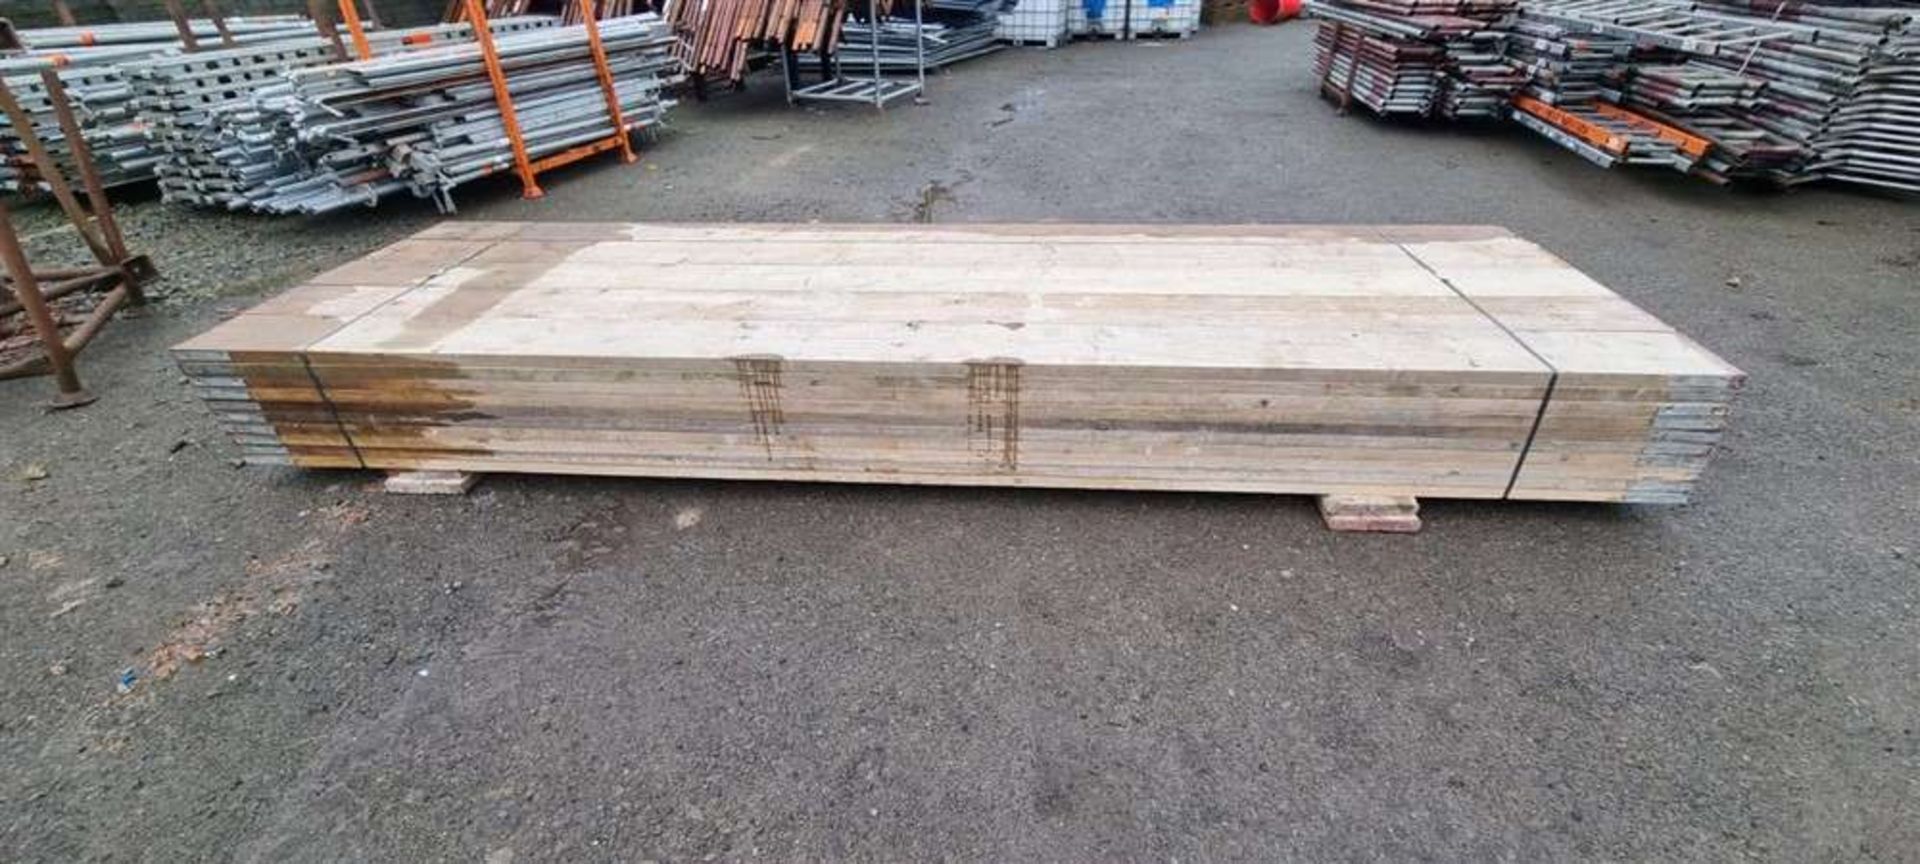 50 x 13ft Scaffold Boards (Sold on Site - Burnley)